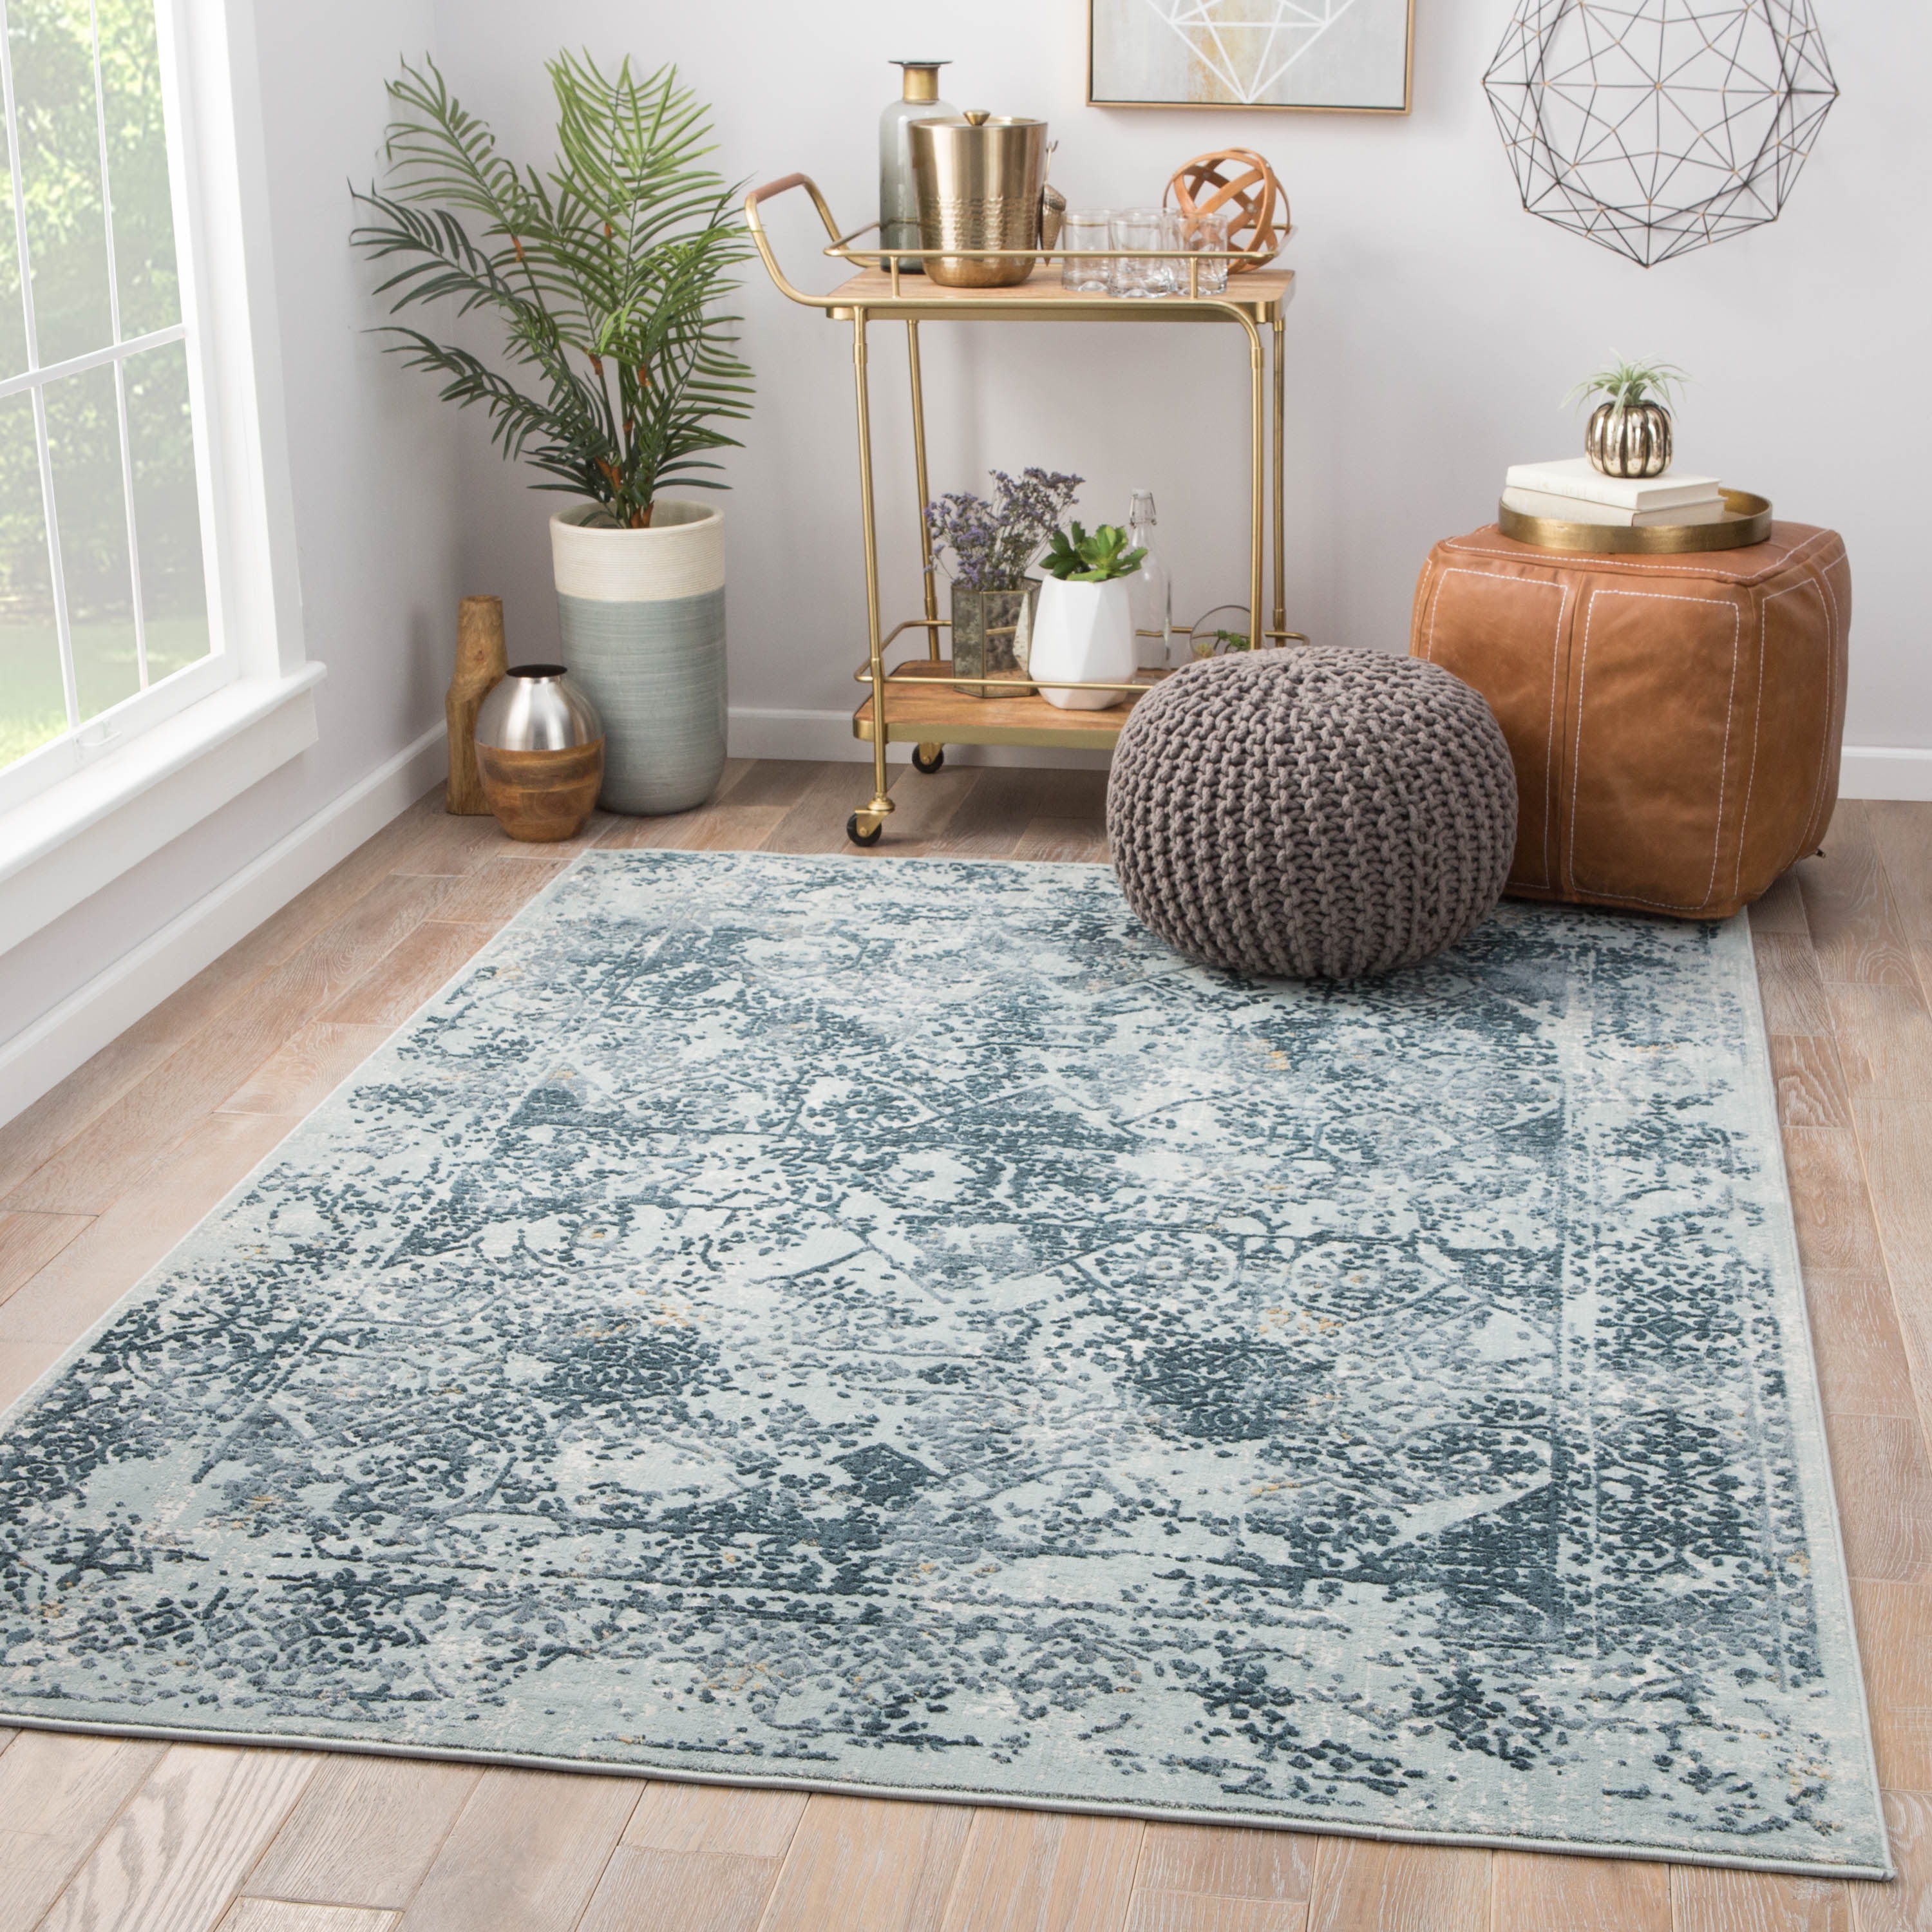 Yvie Abstract Blue/ Teal Area Rug (7'6" X 9'6") - Image 4